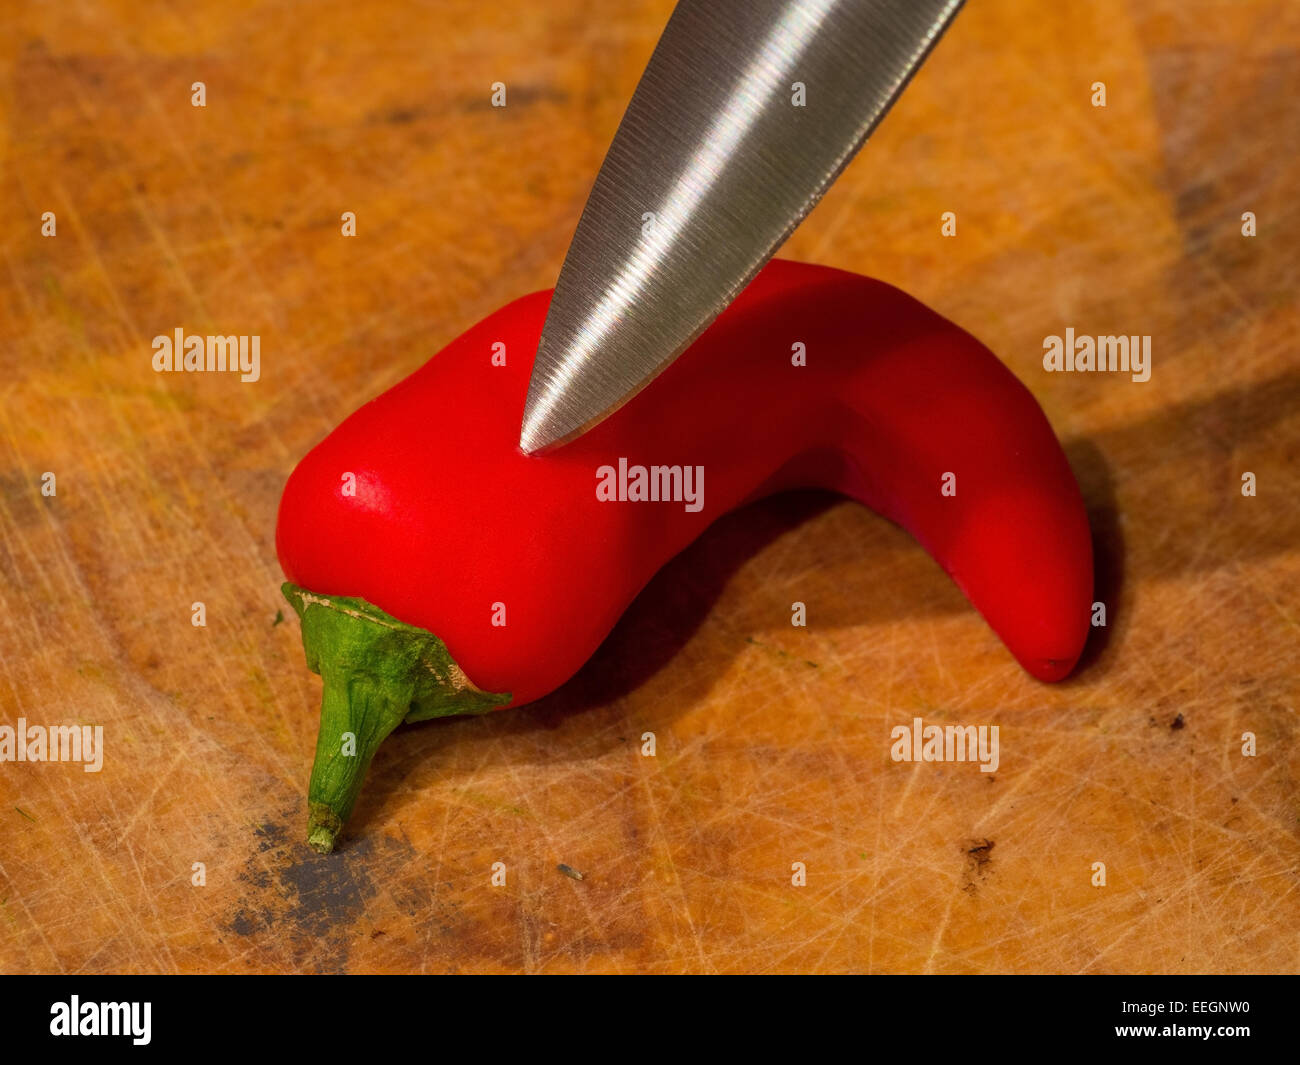 A bright red chili pepper stabbed with a kitchen knife. Stock Photo